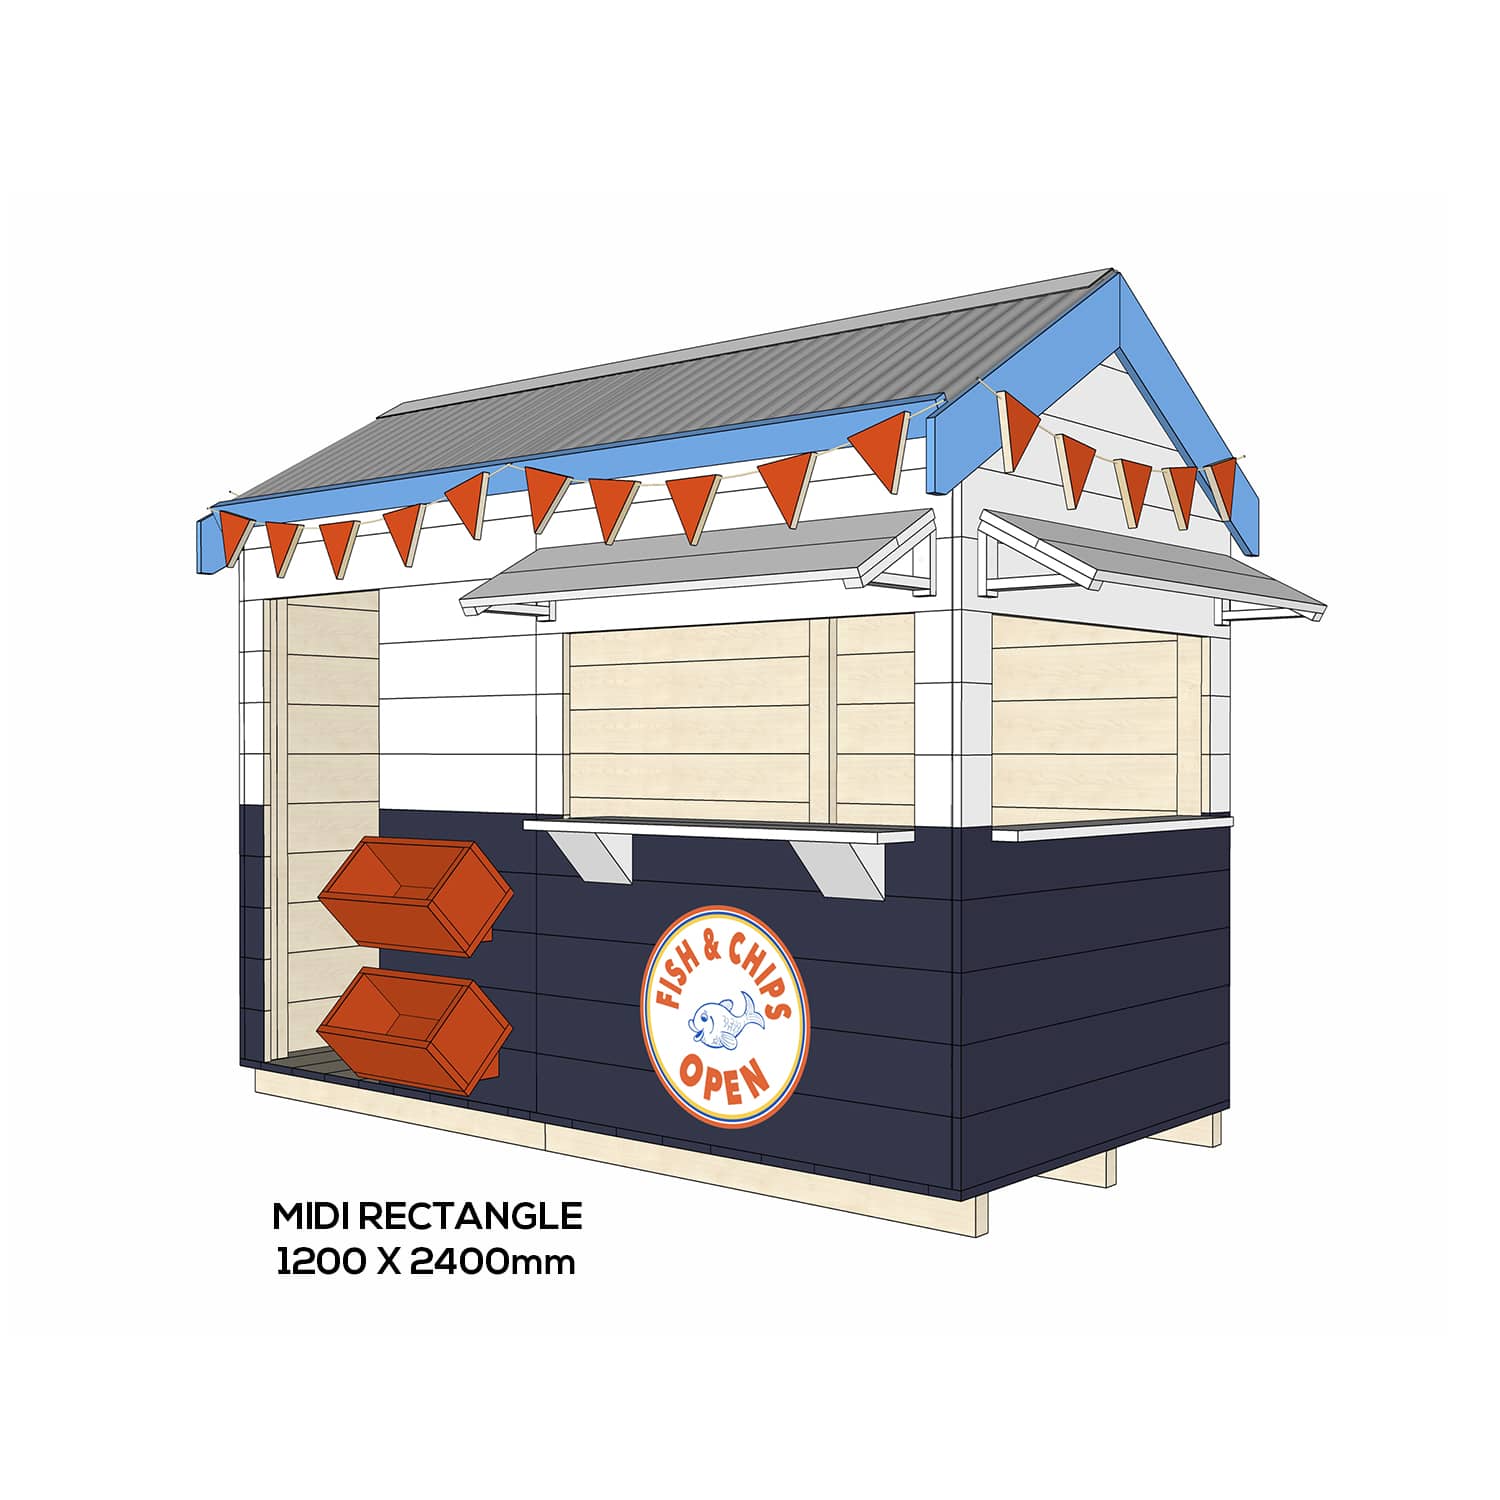 Painted wooden fish n chip shop themed cubby midi rectangle size